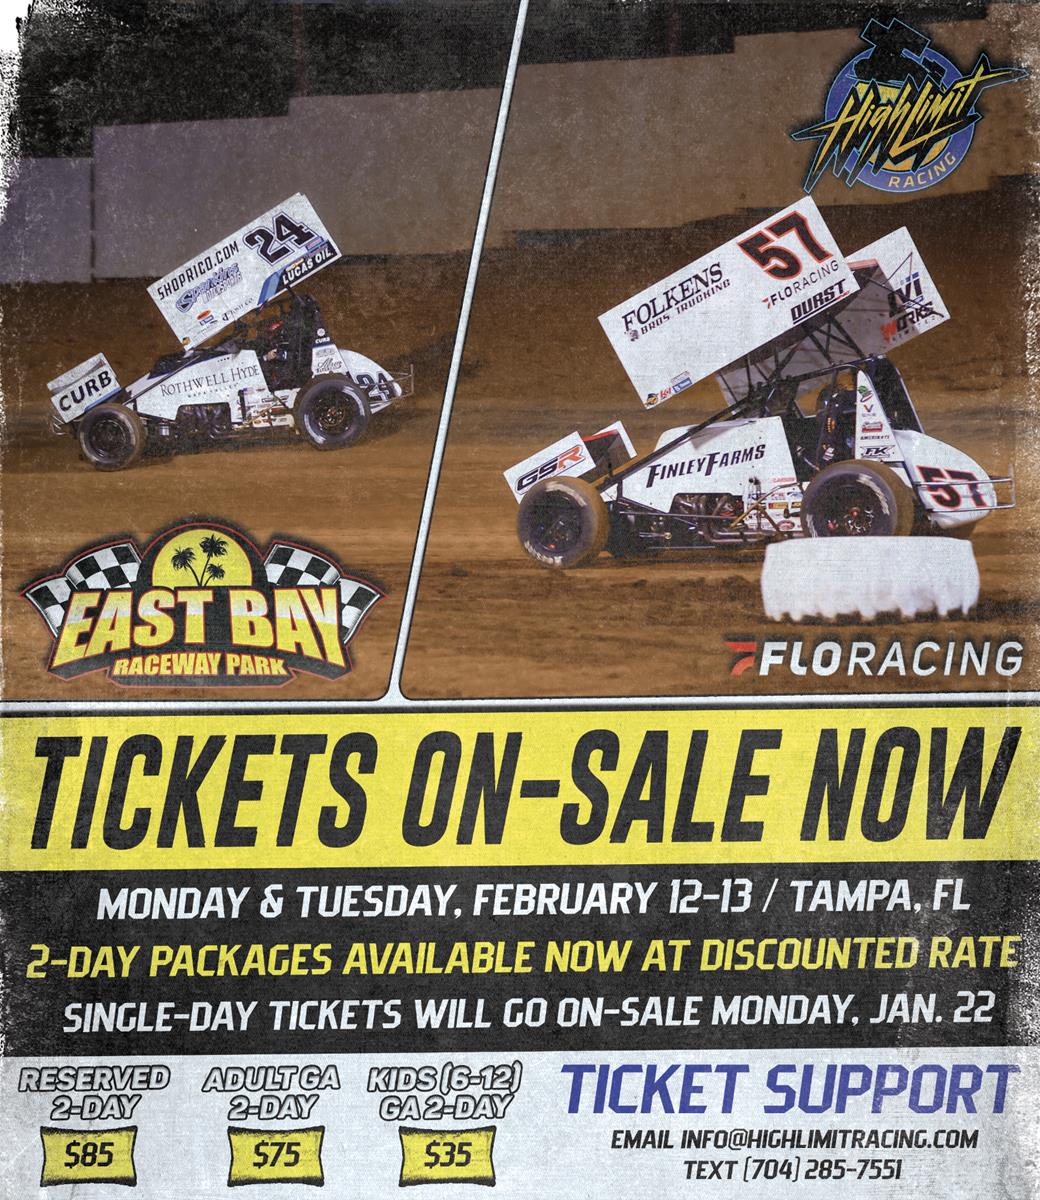 Two-Day Ticket Packages Available Now for East Bay Opener